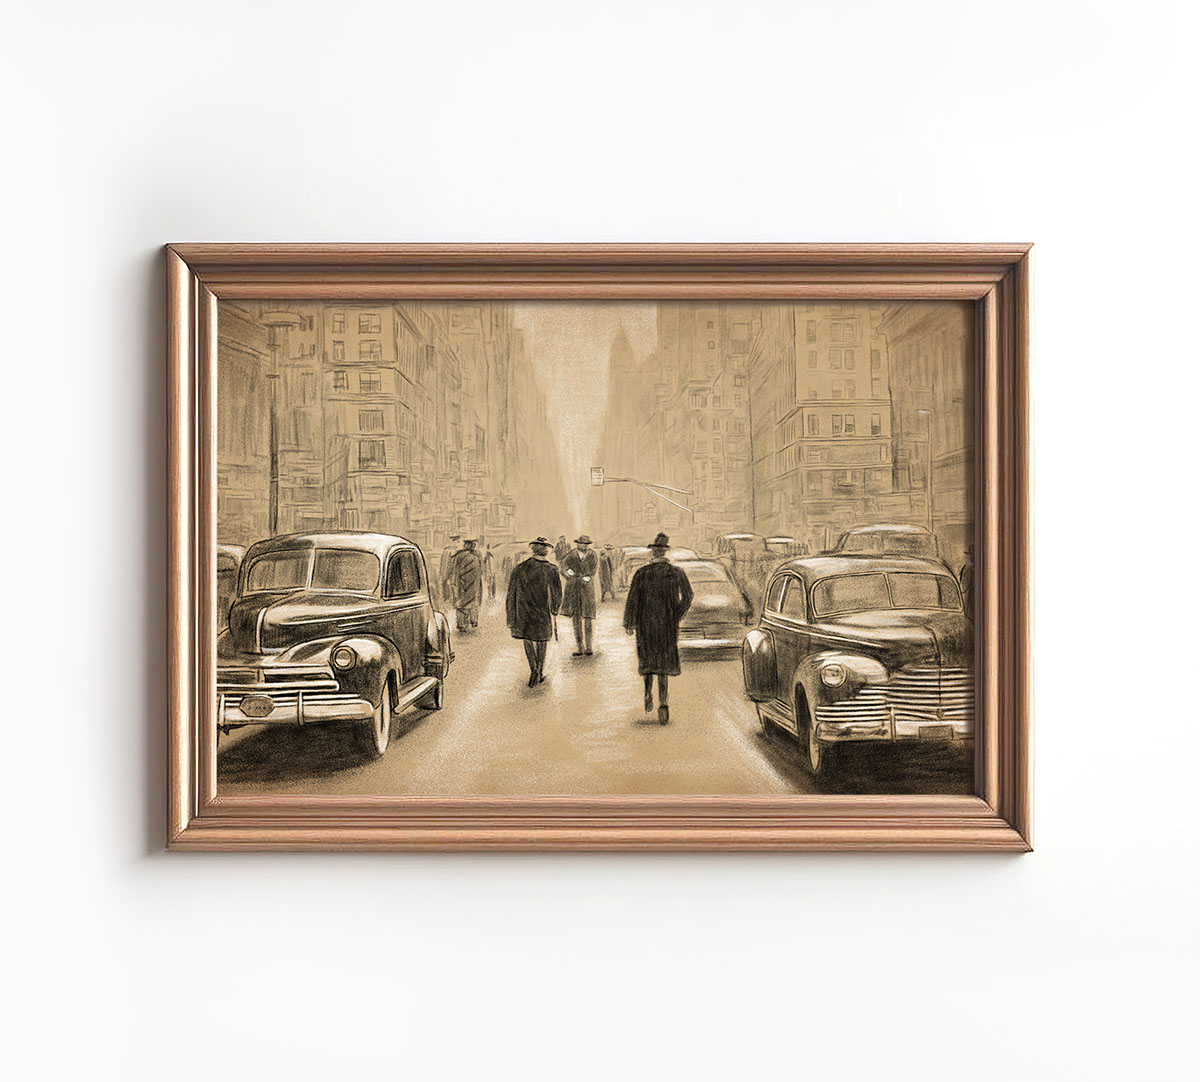 New York City drawing vintage sketch rendition image